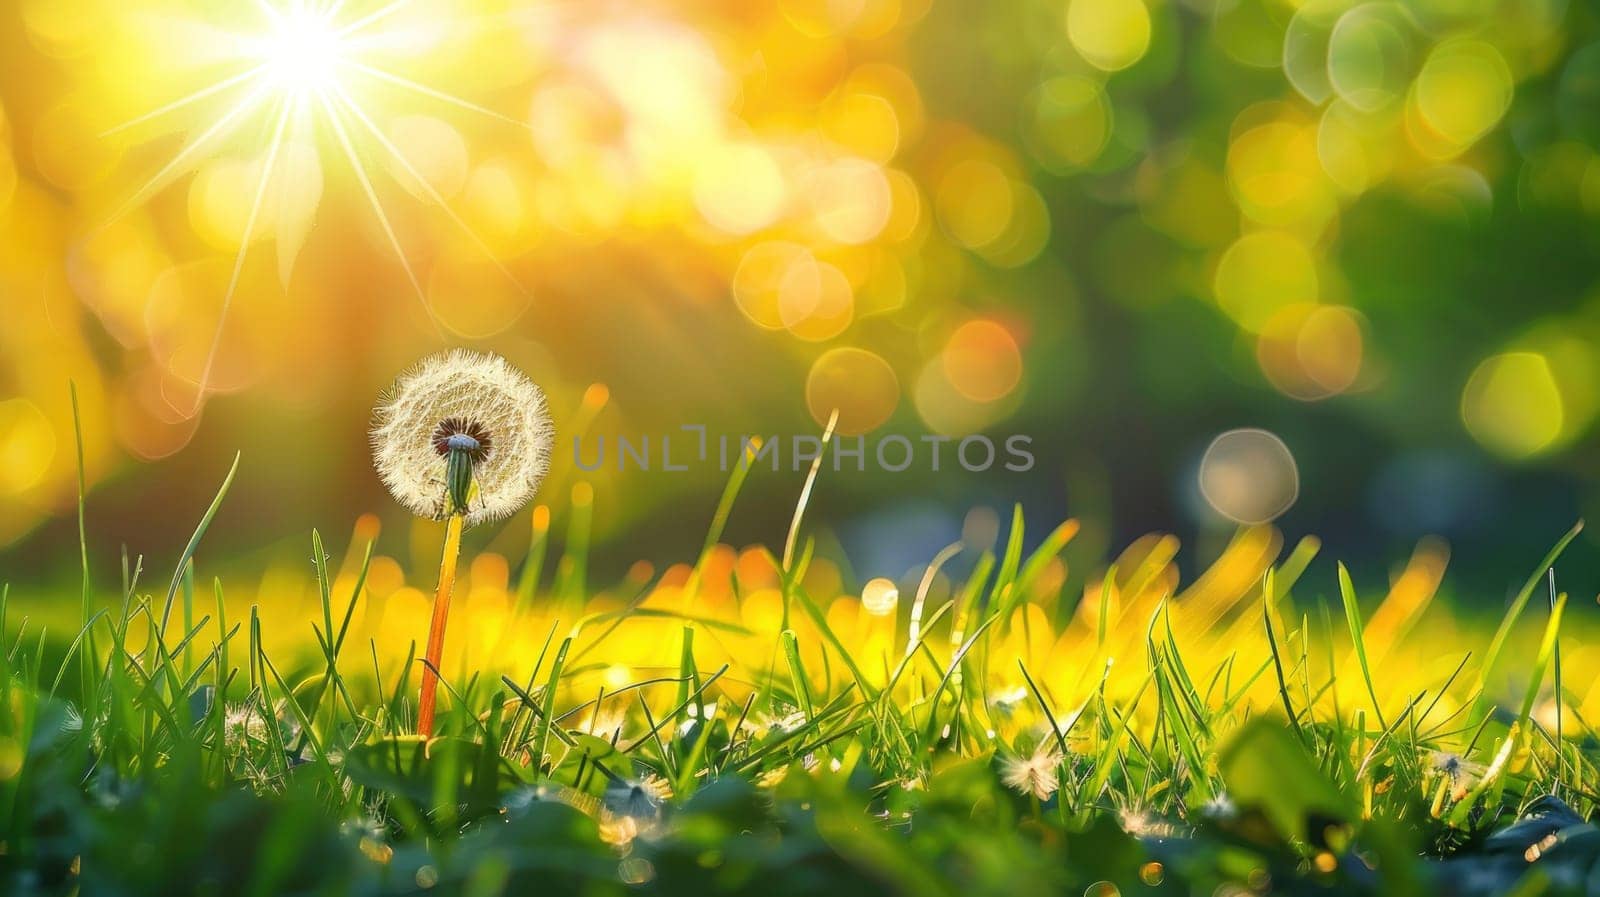 Dandelion in the Wind on Green Grass Spring Nature Background with Sun Rays and Bokeh Effect Concept Serene Natural Beauty.